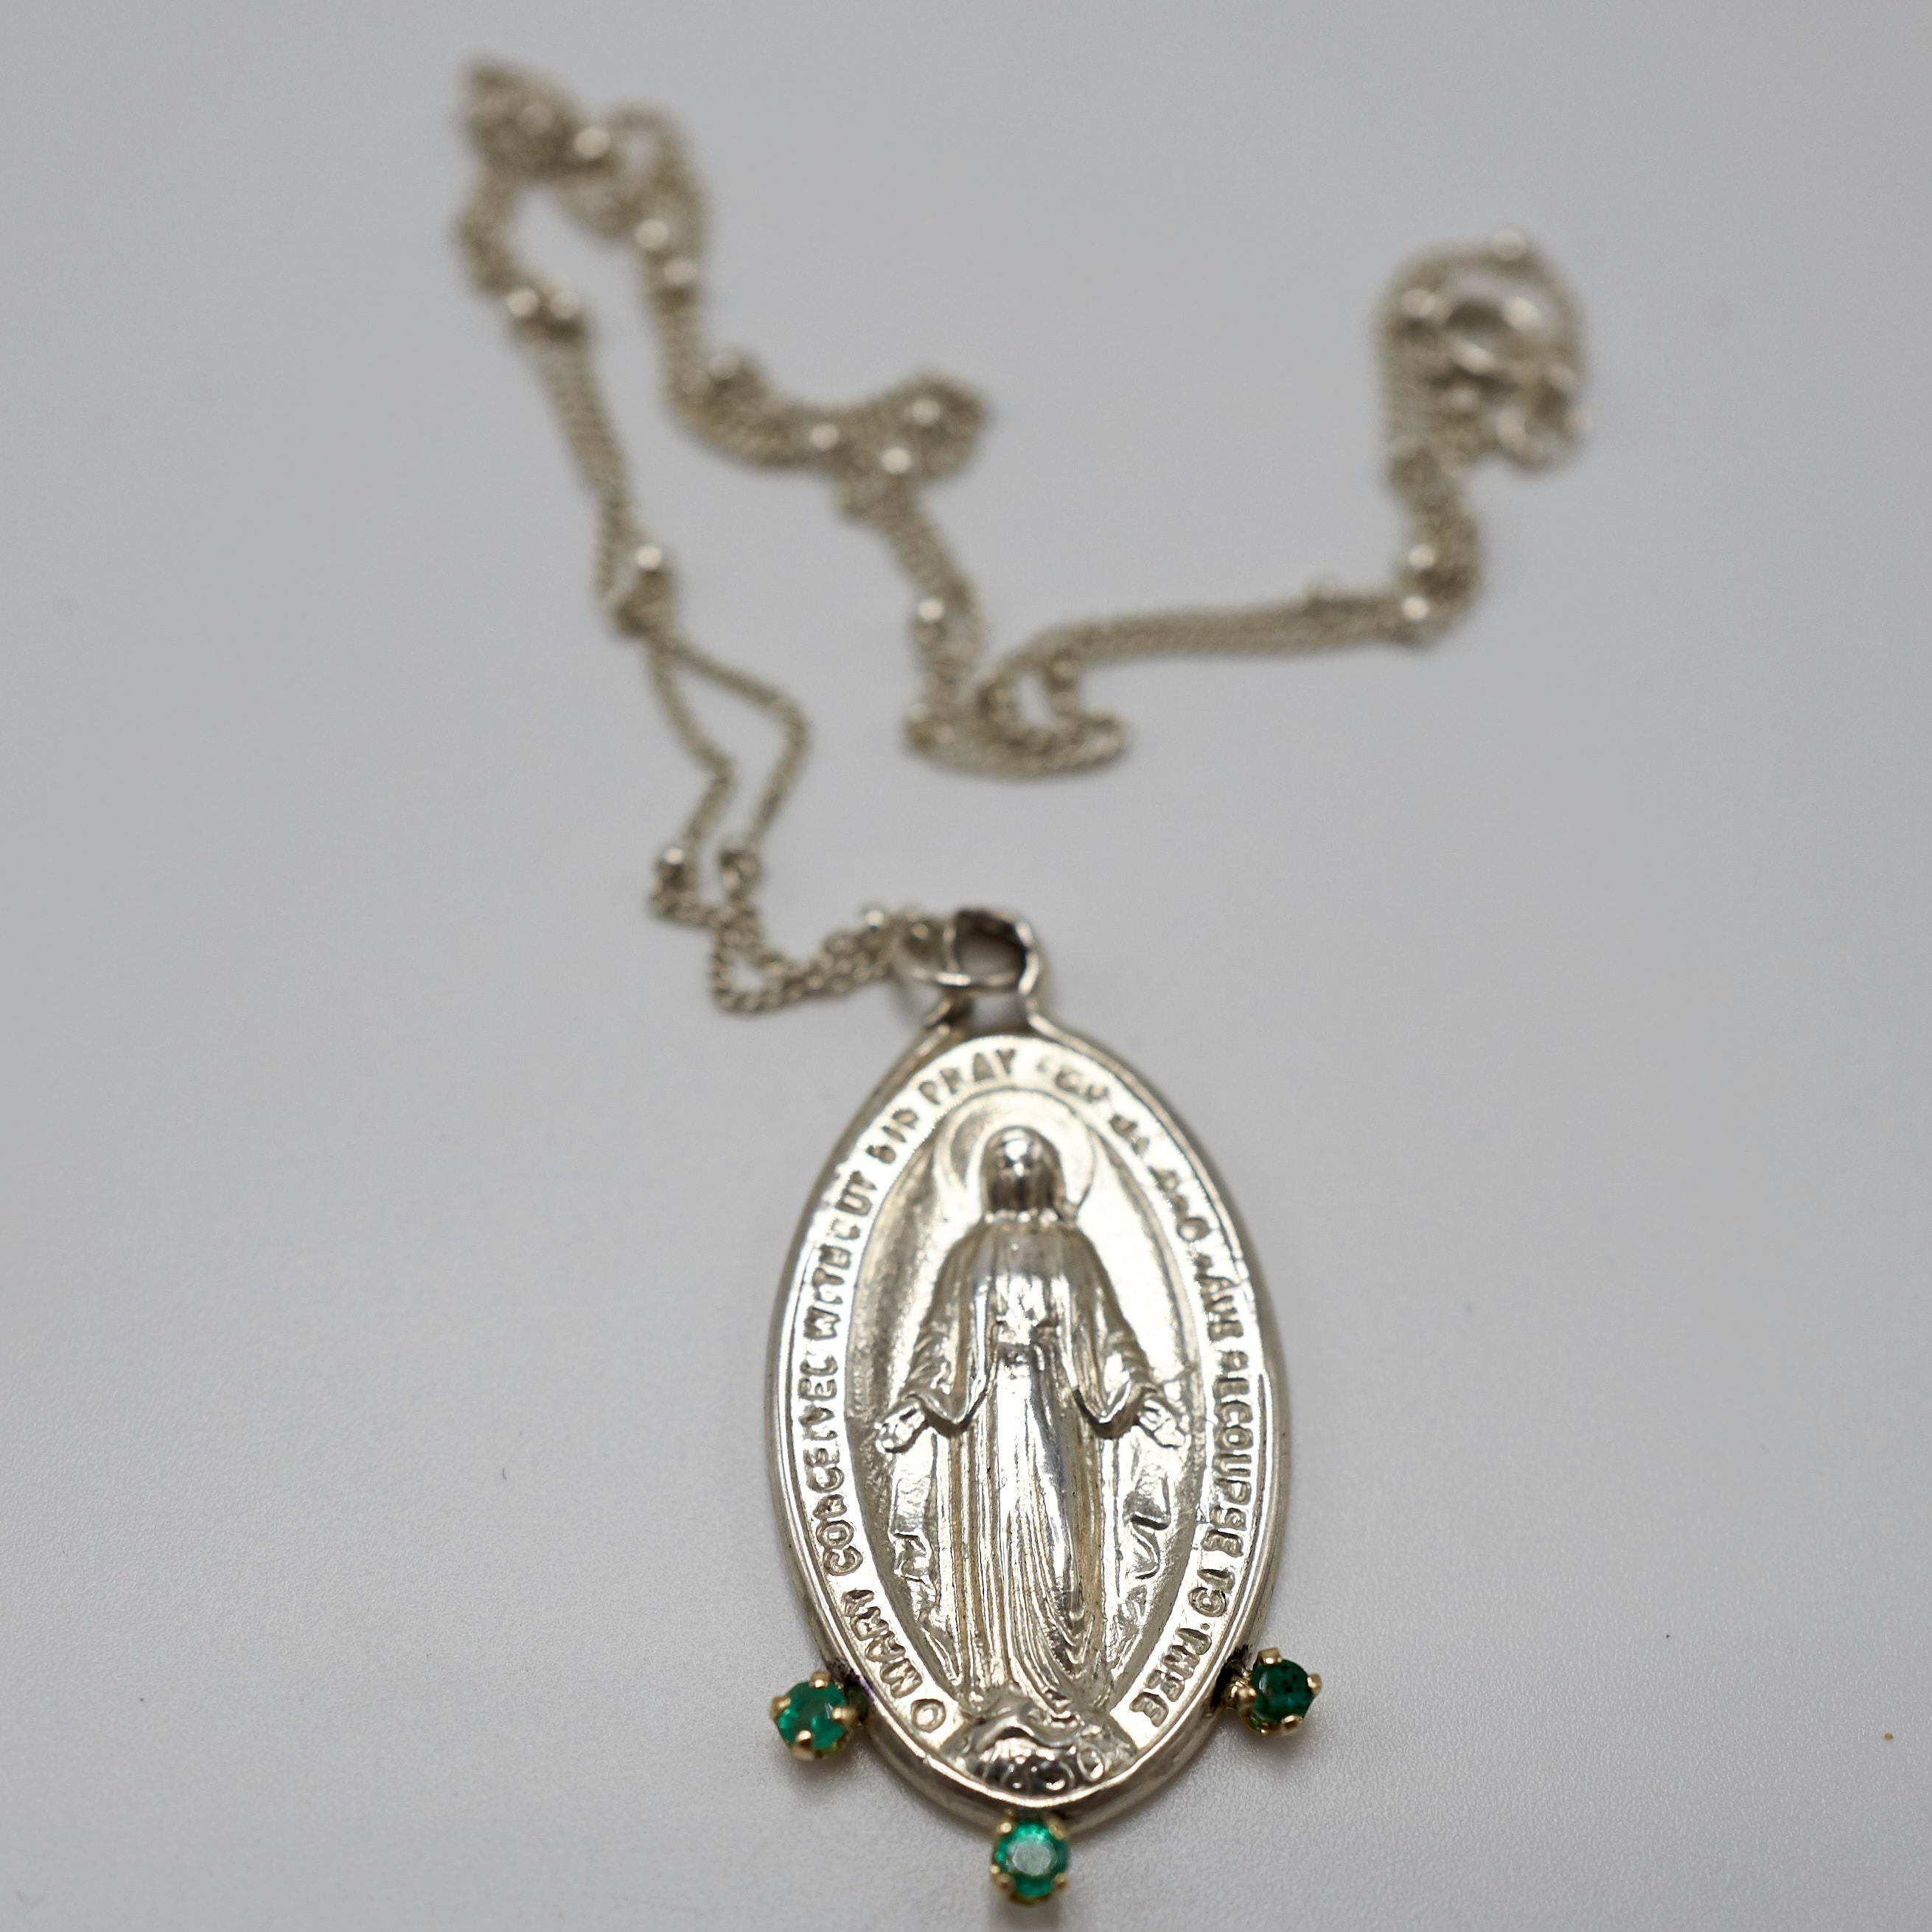 Virgin Mary Medal Oval Pendant Emeralds Silver Chain Necklace J Dauphin

Symbols or medals can become a powerful tool in our arsenal for the spiritual. 
Since ancient times spiritual pendants, religious medals has been used to protect us. During